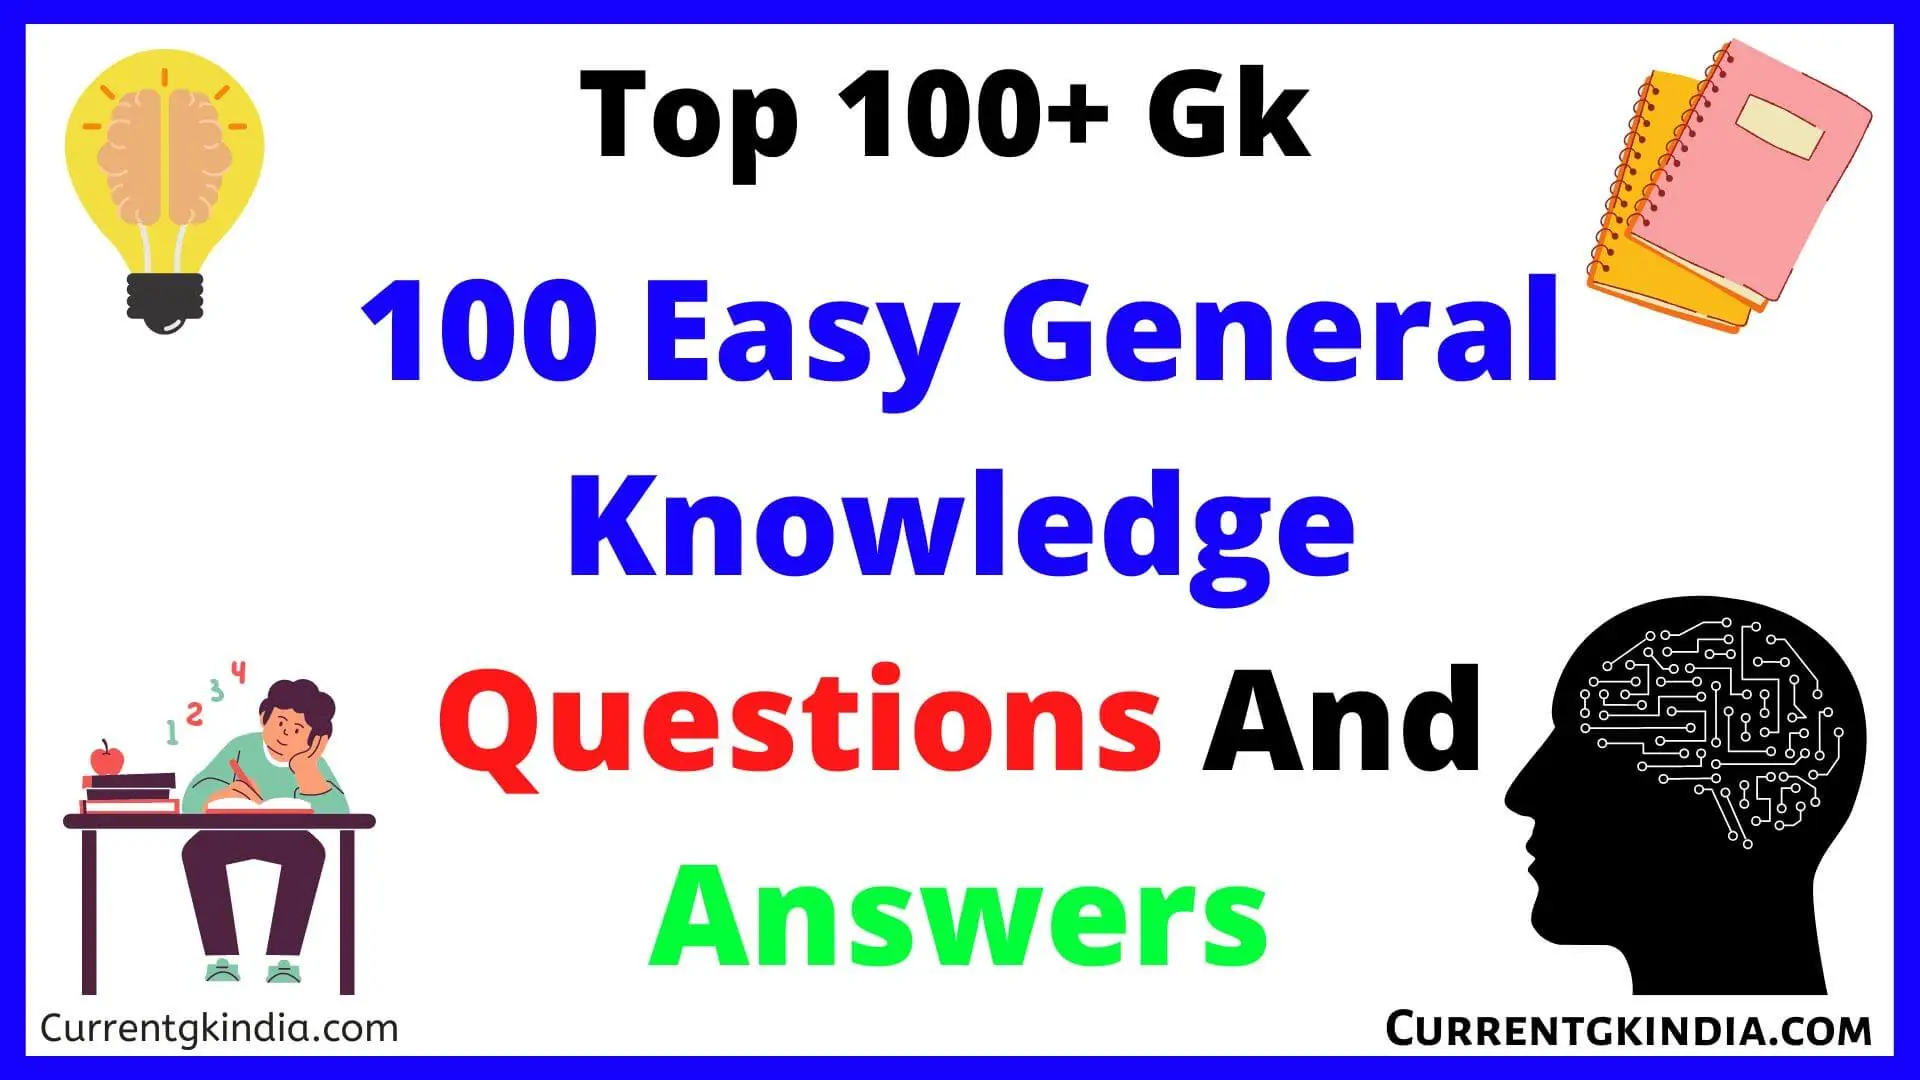 100 Easy General Knowledge Questions And Answers » Current Gk India